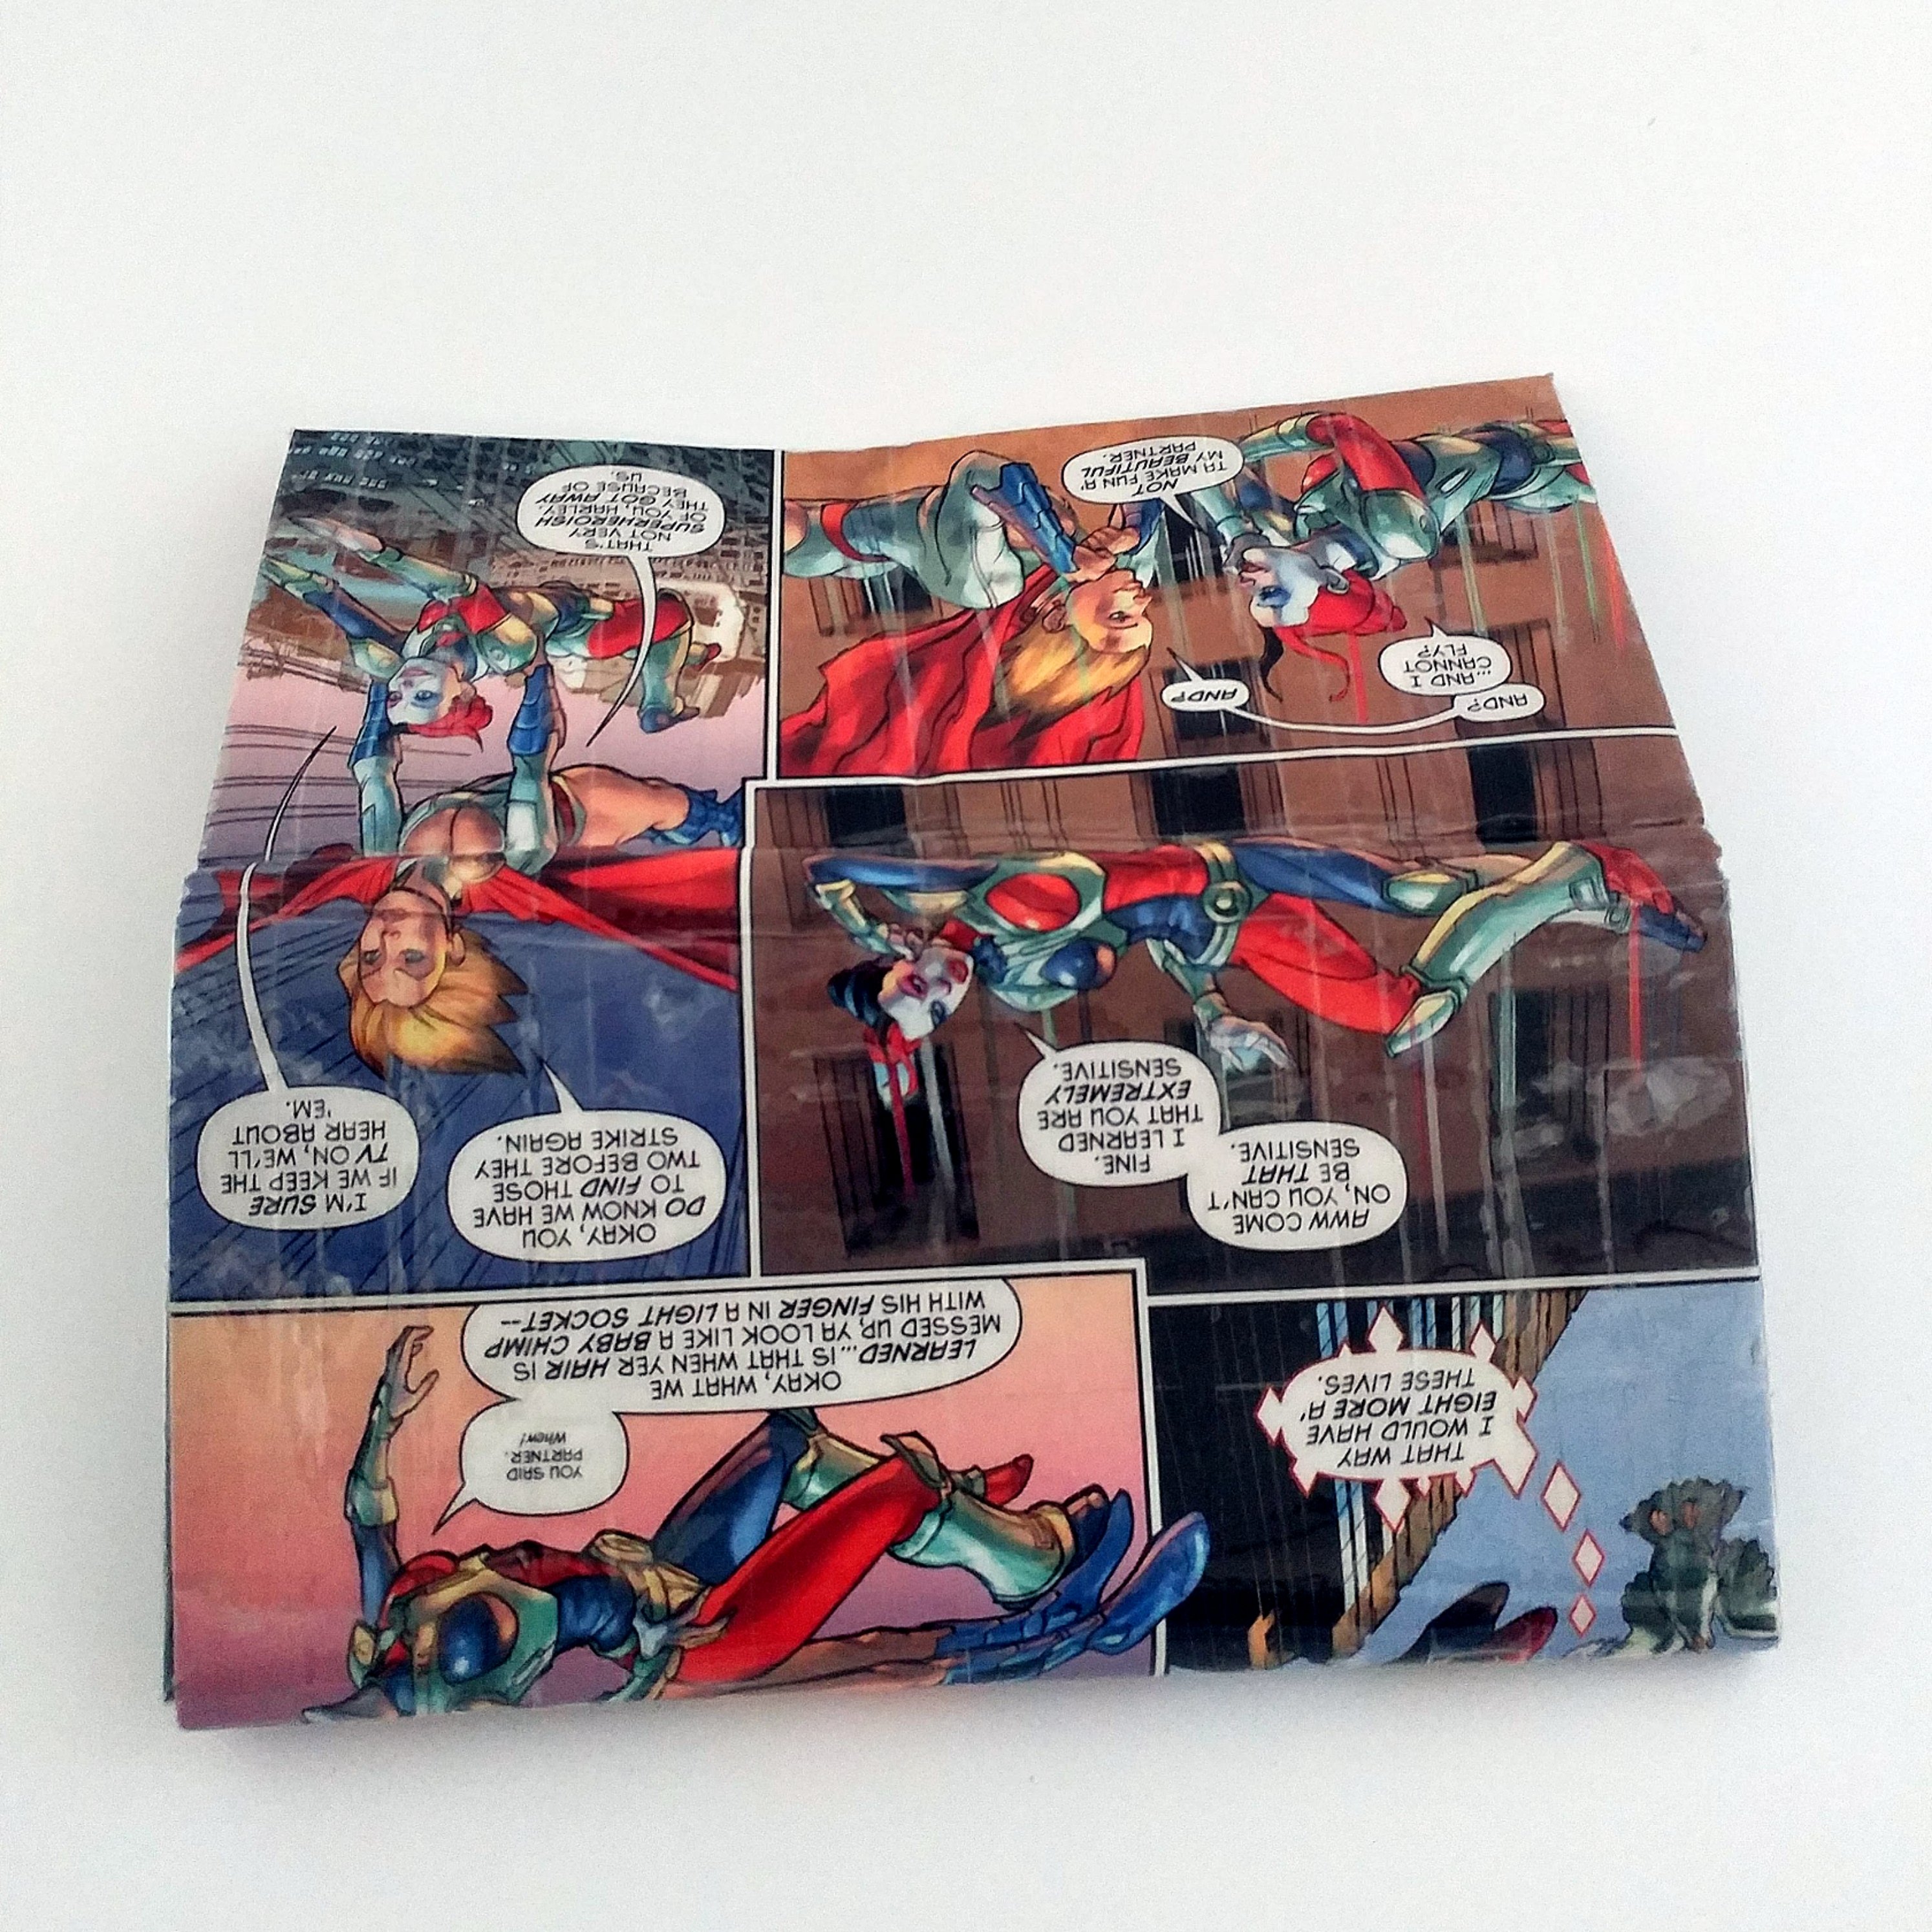 Harley Quinn and Power Girl wallet made from an upcycled Harley Quinn comic book.